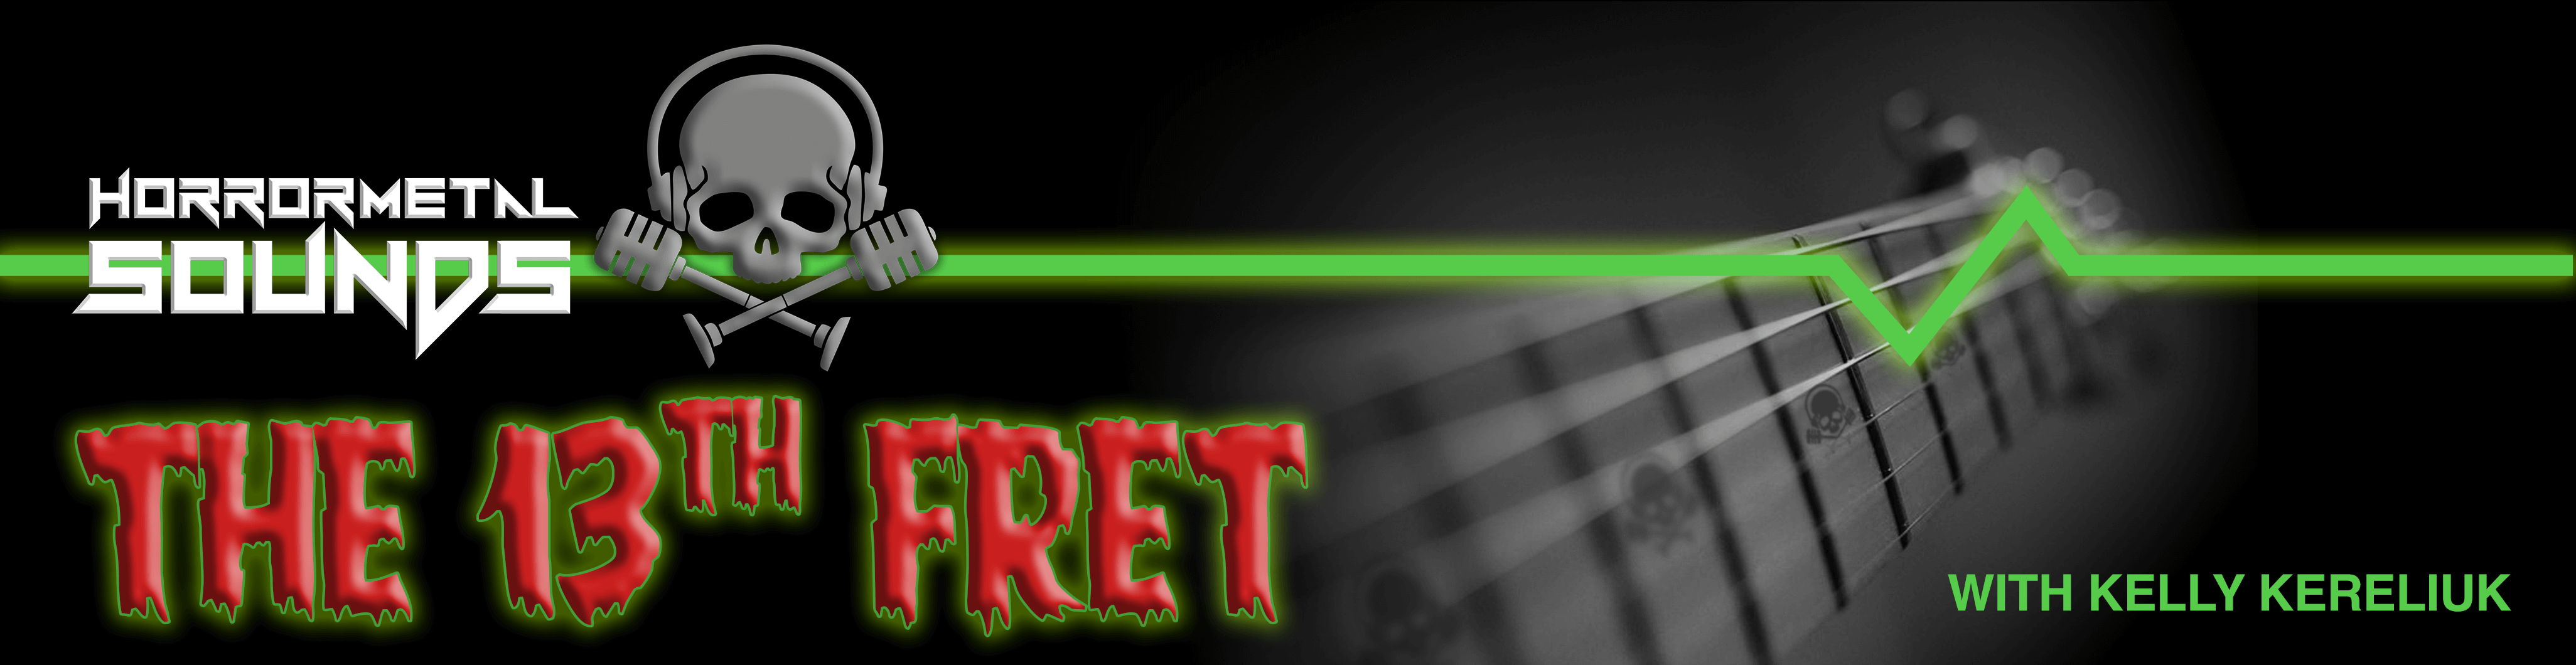 HORROR METAL SOUNDS: THE 13TH FRET